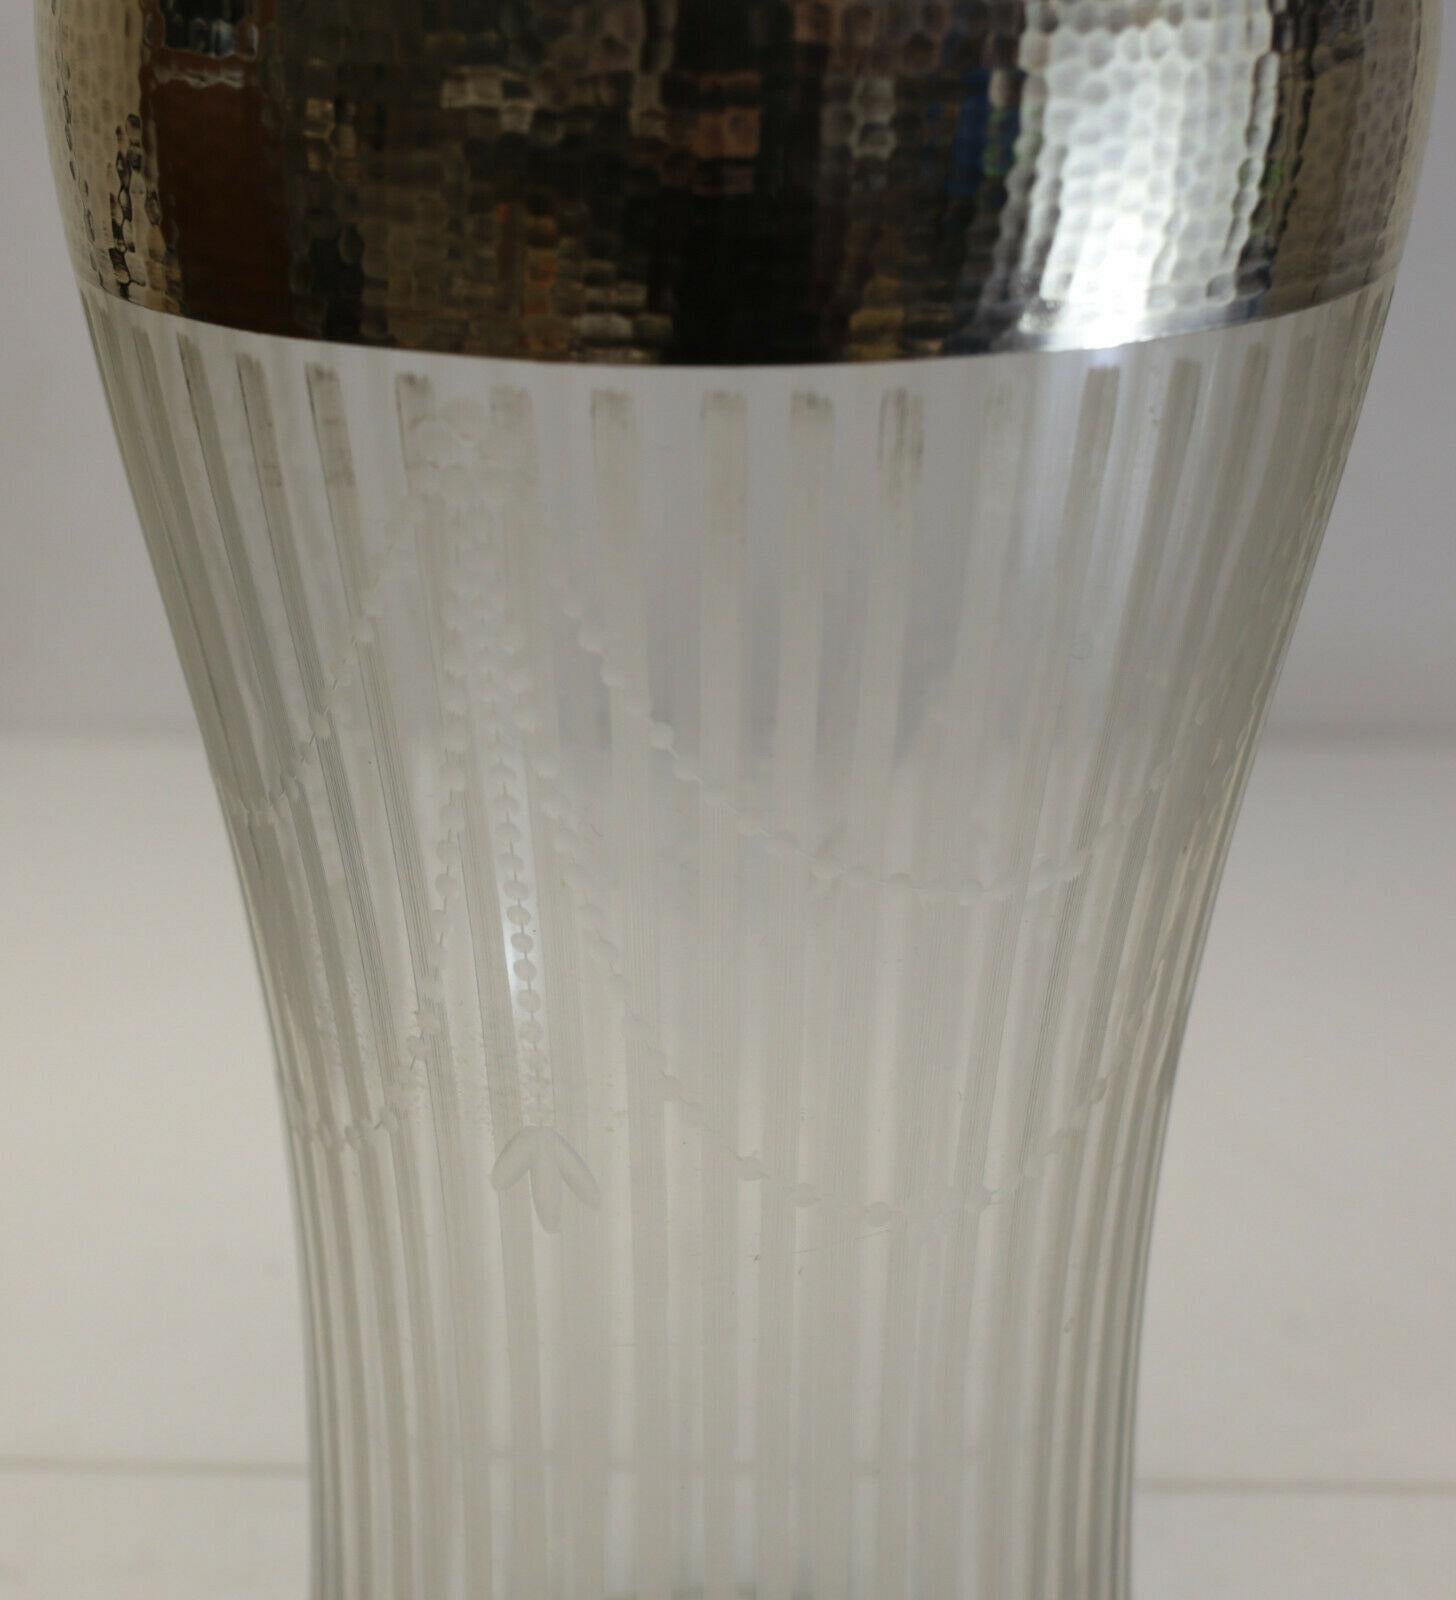 Fine American sterling silver overlay cut glass vase, circa 1900.

Etched stripes throughout the vase with laurel swags to the exterior of the vase. Unusual hand hammered silver overlay towards the top rim. Marked sterling. Cut pontil to the